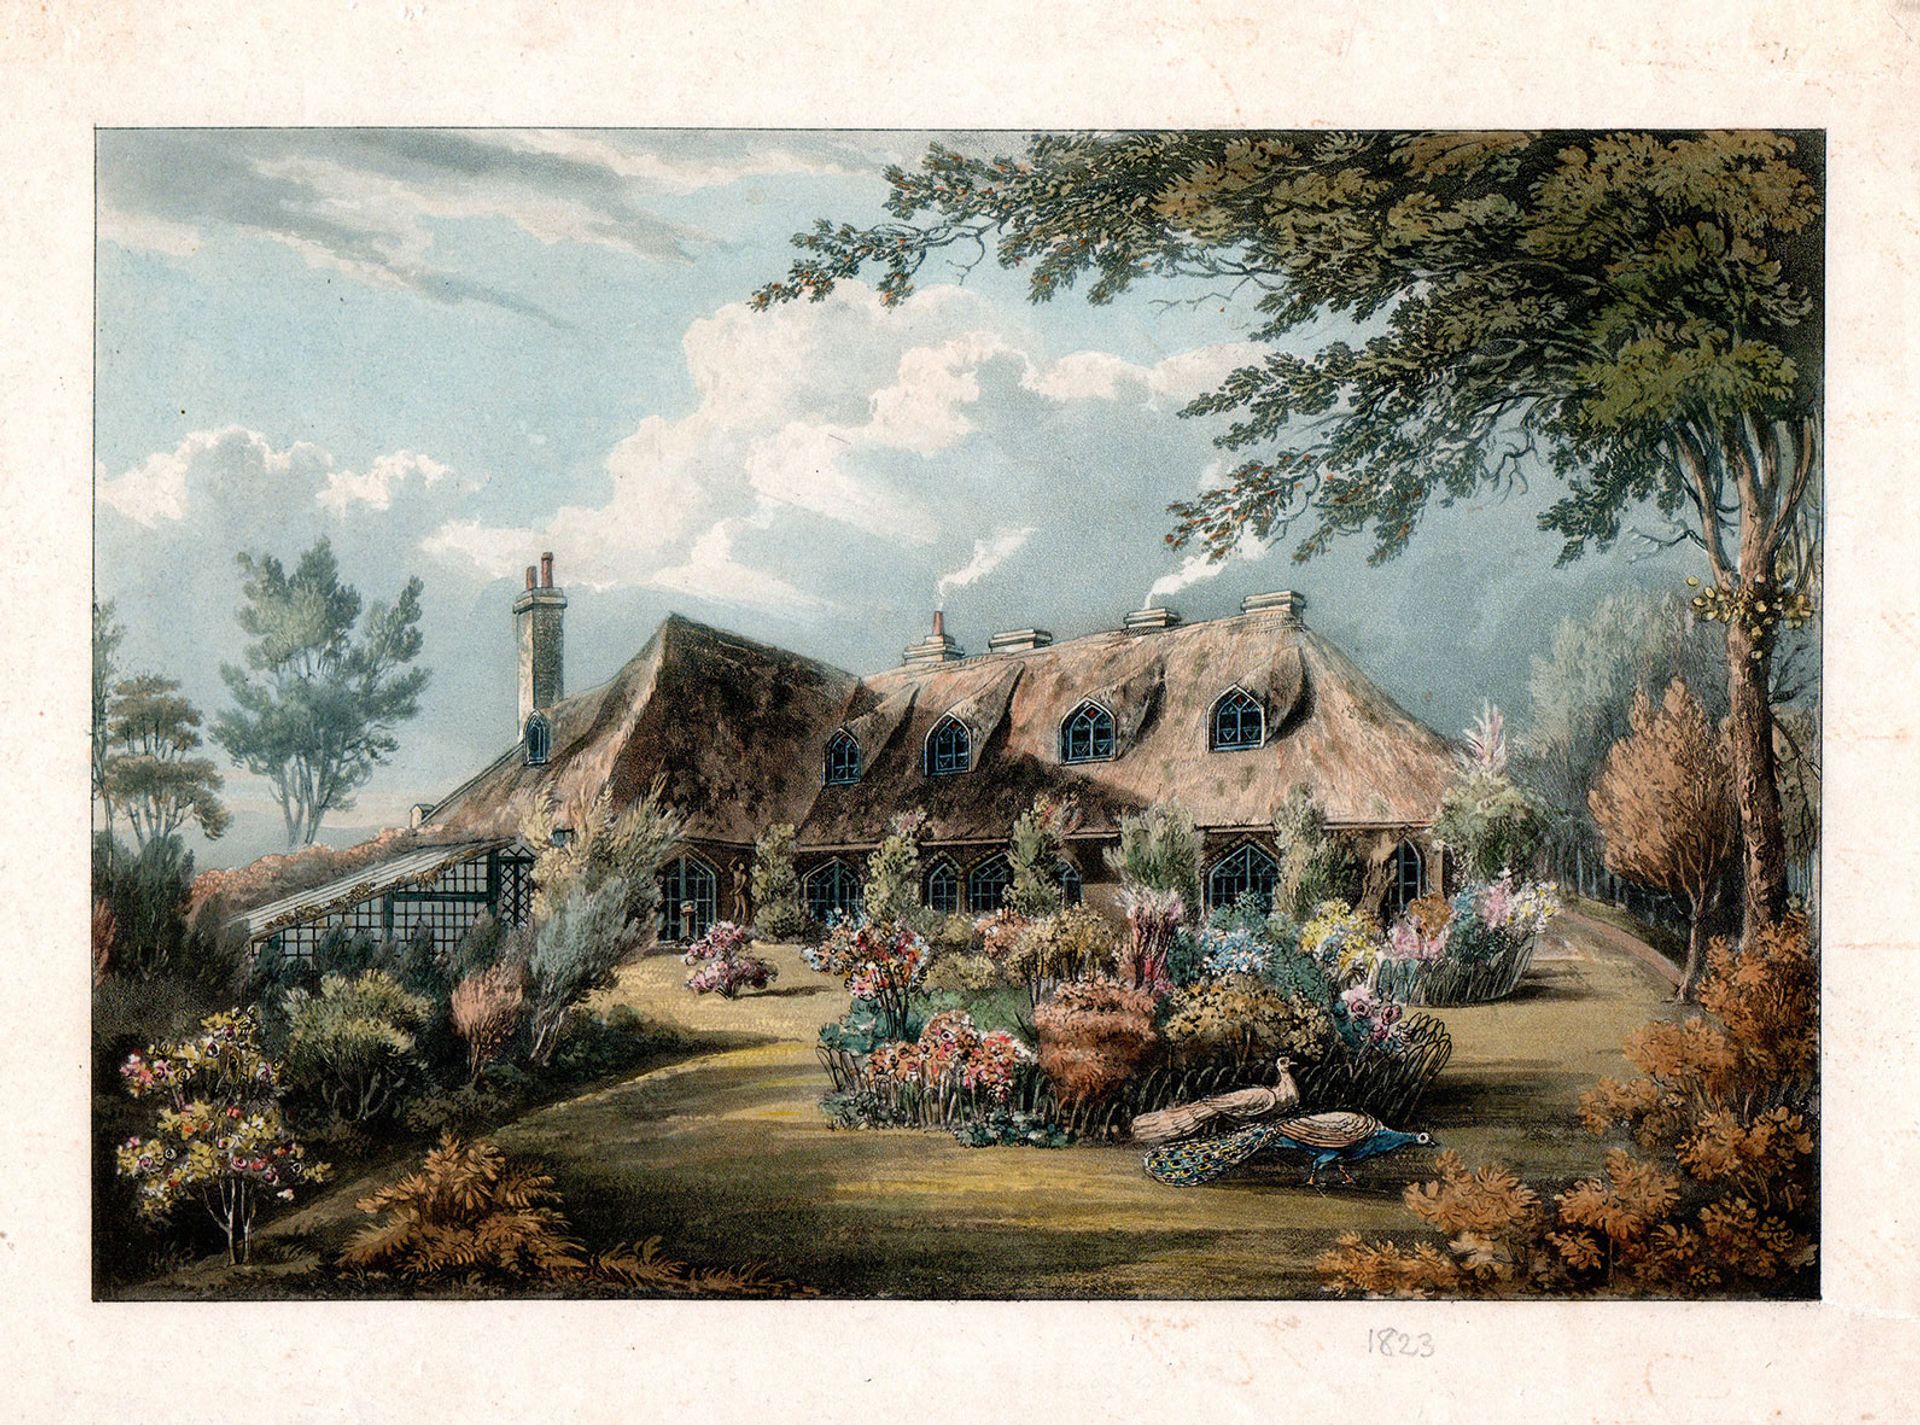 Understanding Englishness: the thatched and picturesque Knowle Cottage, Sidmouth, Devon (around 1823), “one of the most spectacular examples of the entire Cottage Orné genre” 